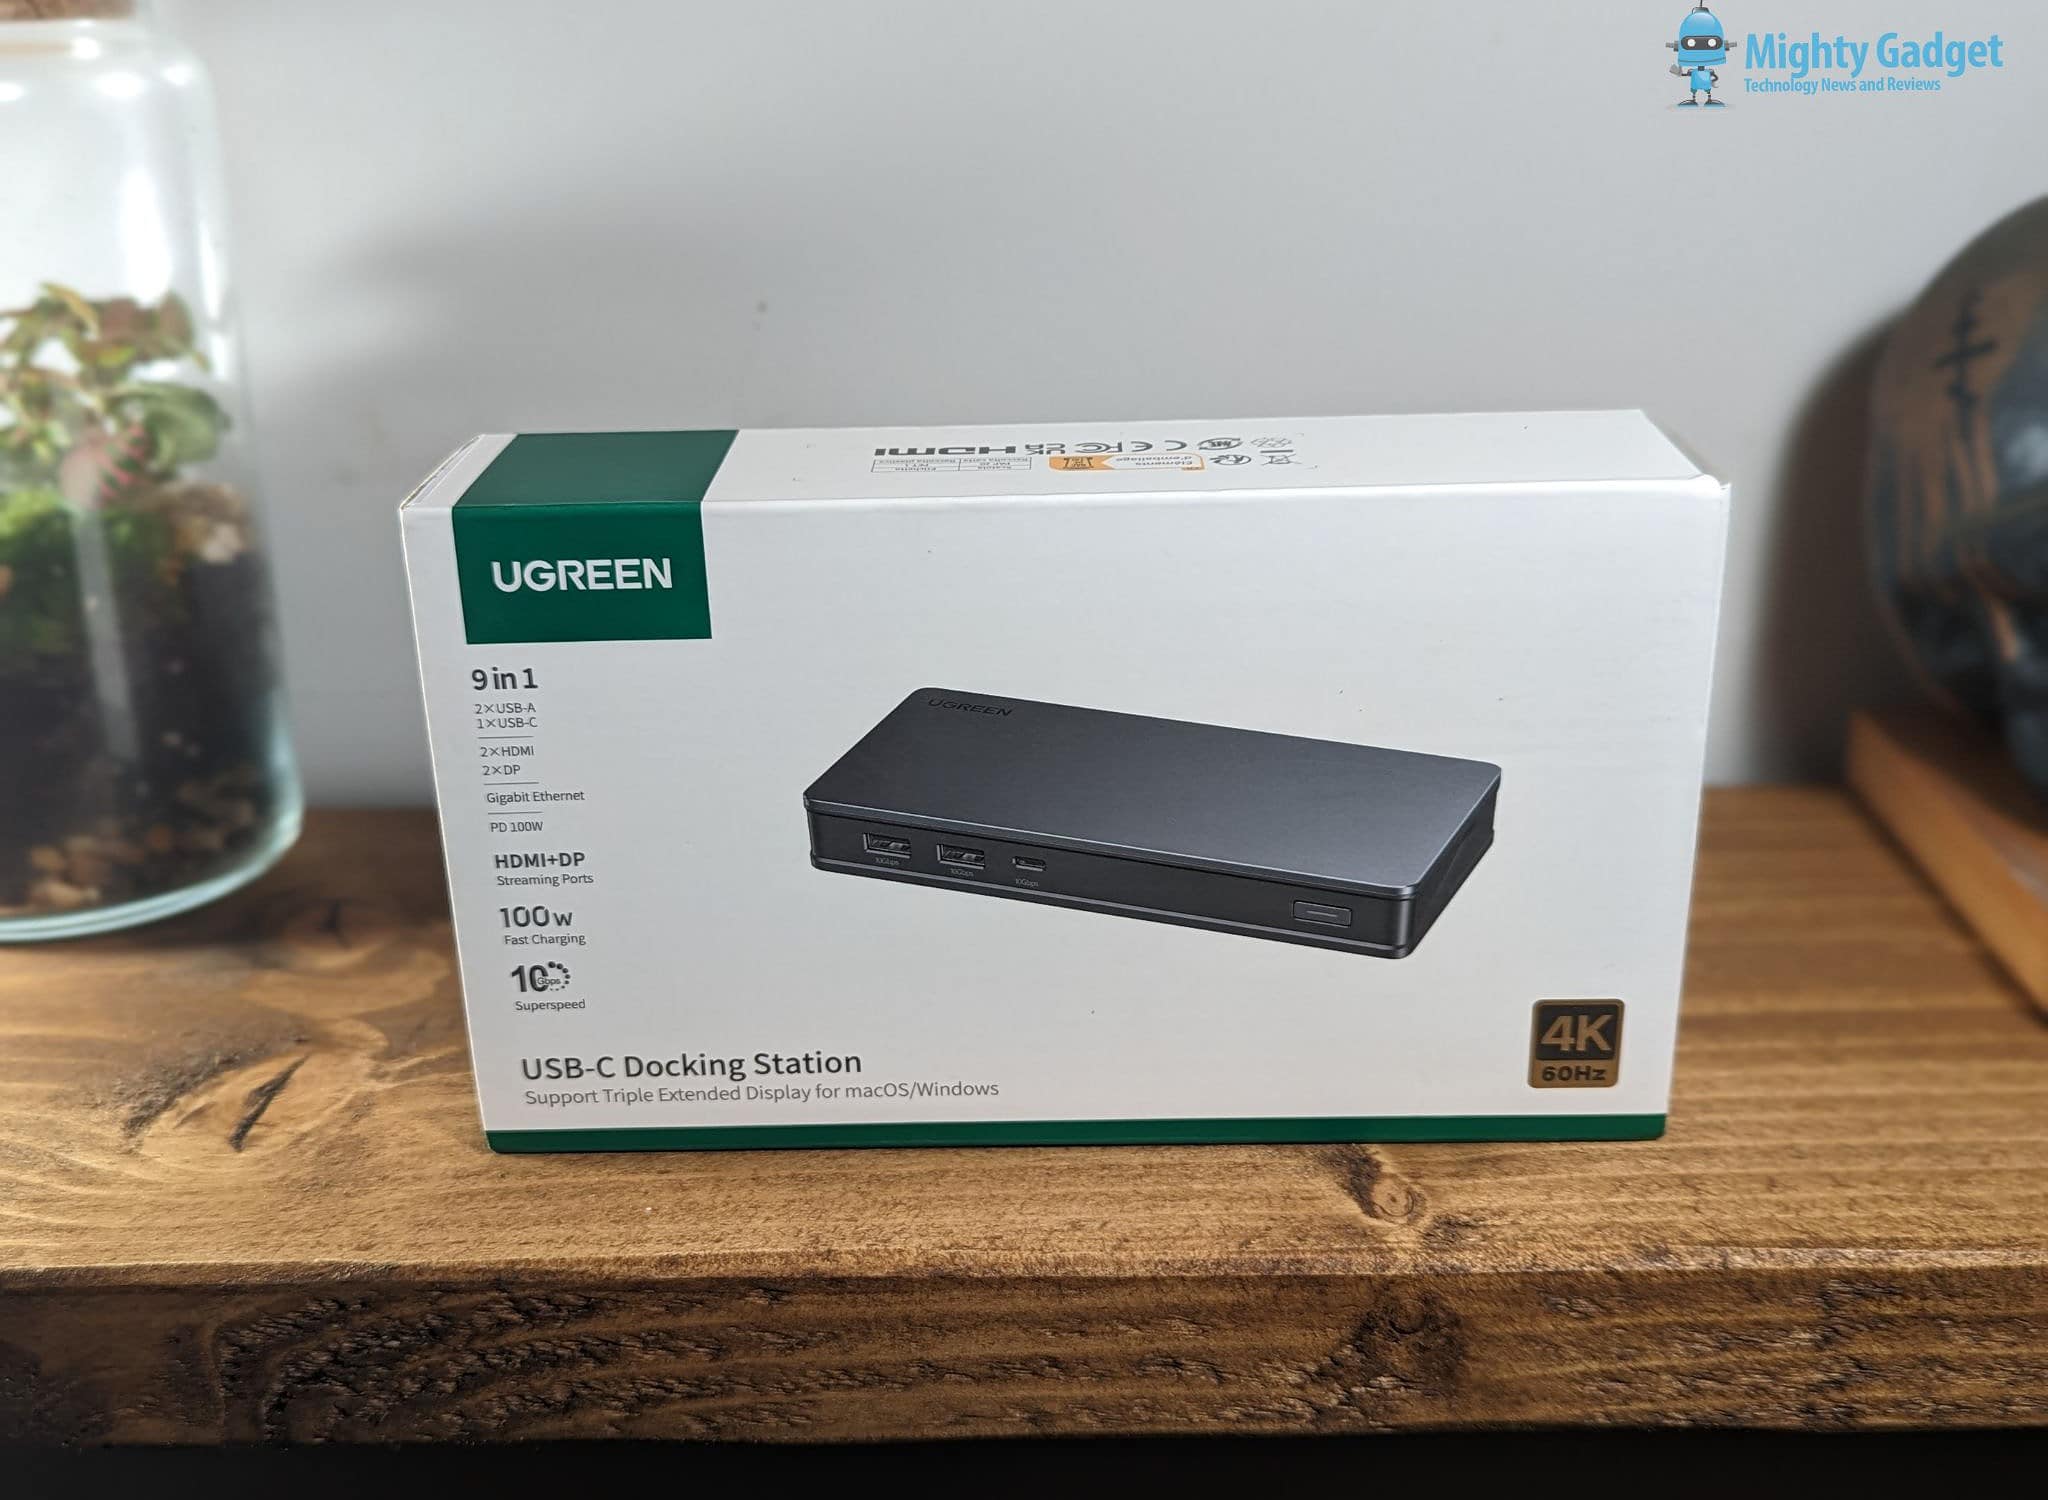 Ugreen 9 in 1 USB C Docking Station Review by Mighty Gadget